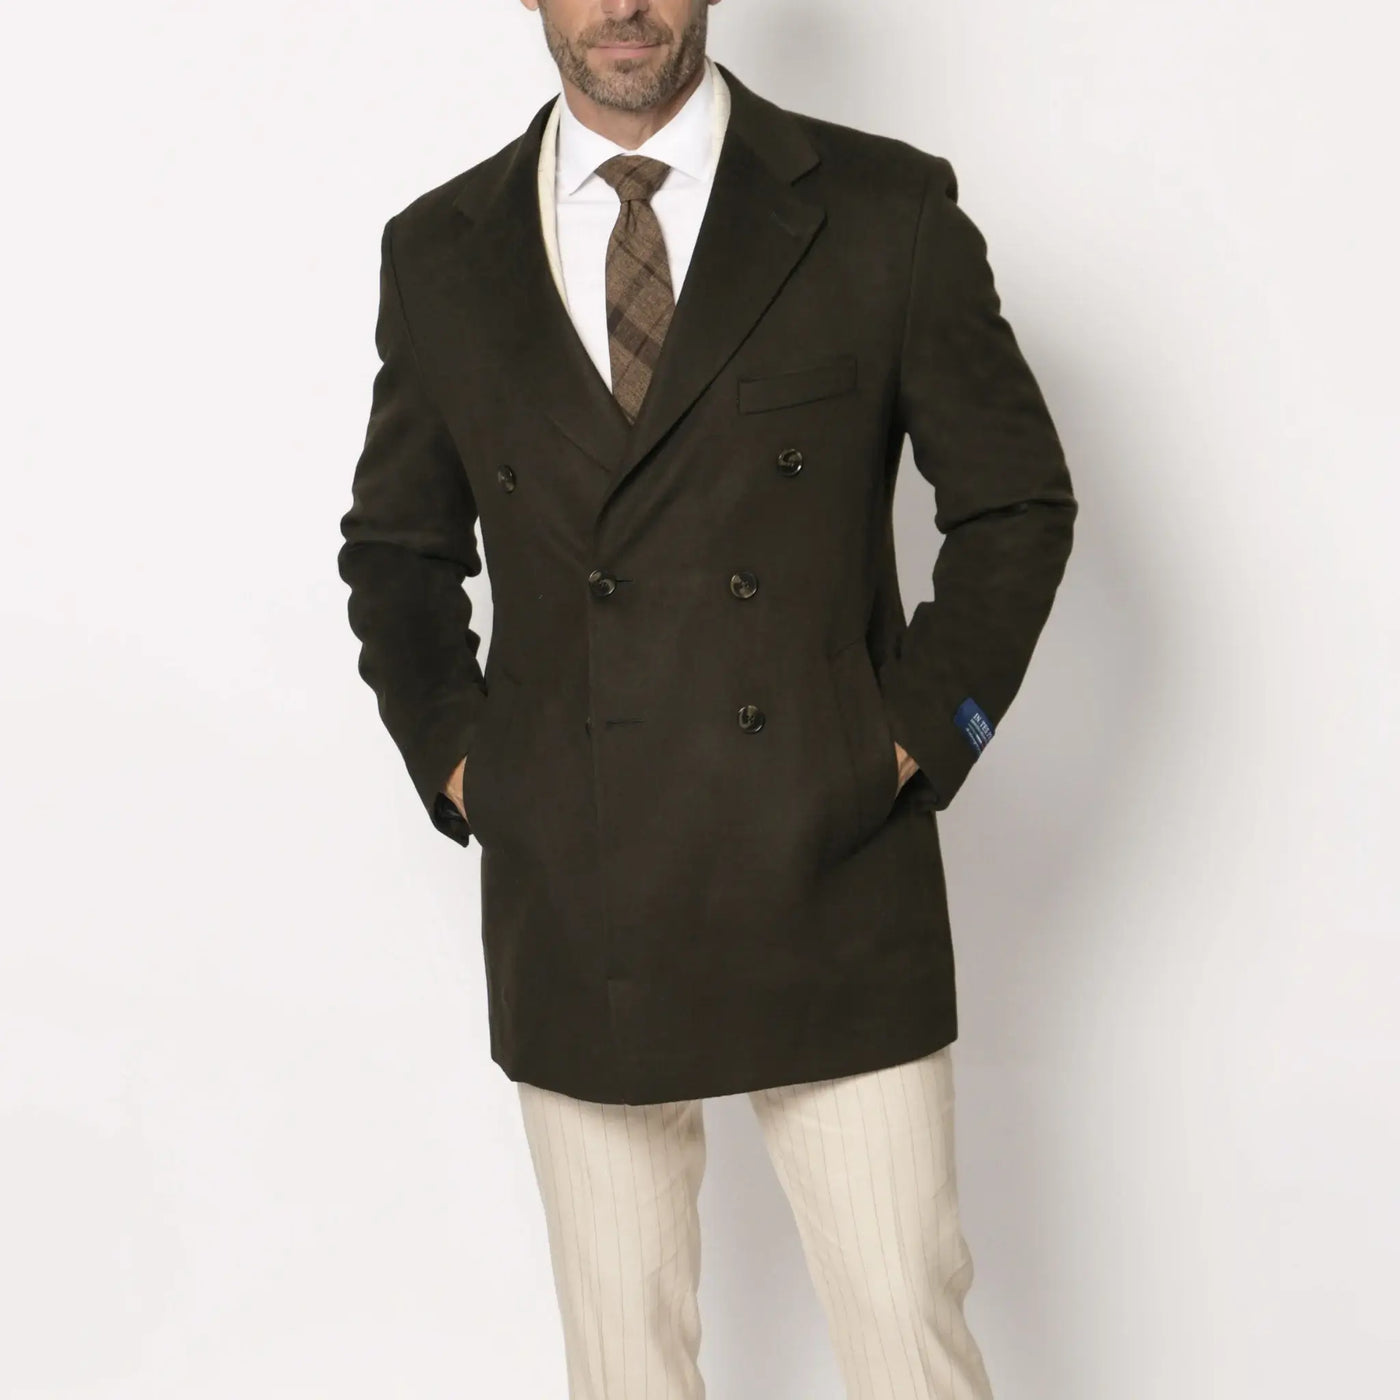 Lodevole Men's Double-breasted Coat Dark Olive Front Hands in Pockets